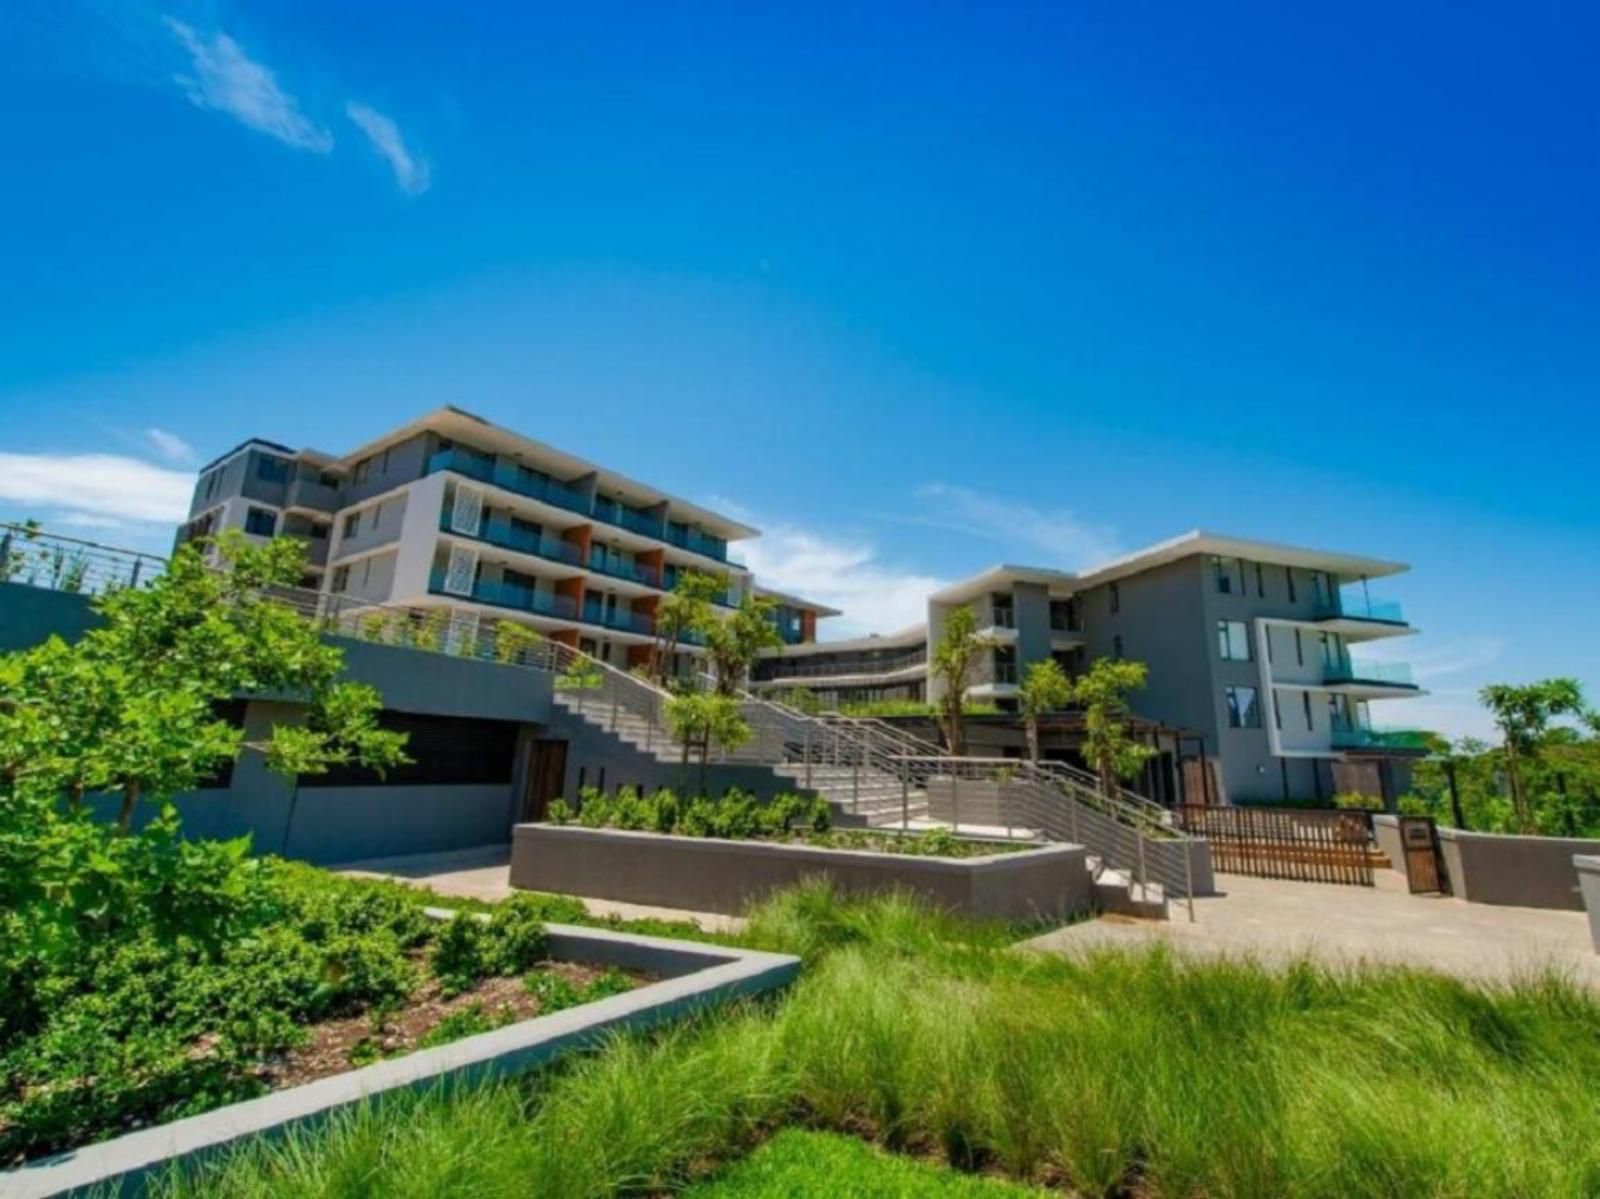 Coral Point Apartment E110 Hillhead Umhlanga Kwazulu Natal South Africa Complementary Colors, House, Building, Architecture